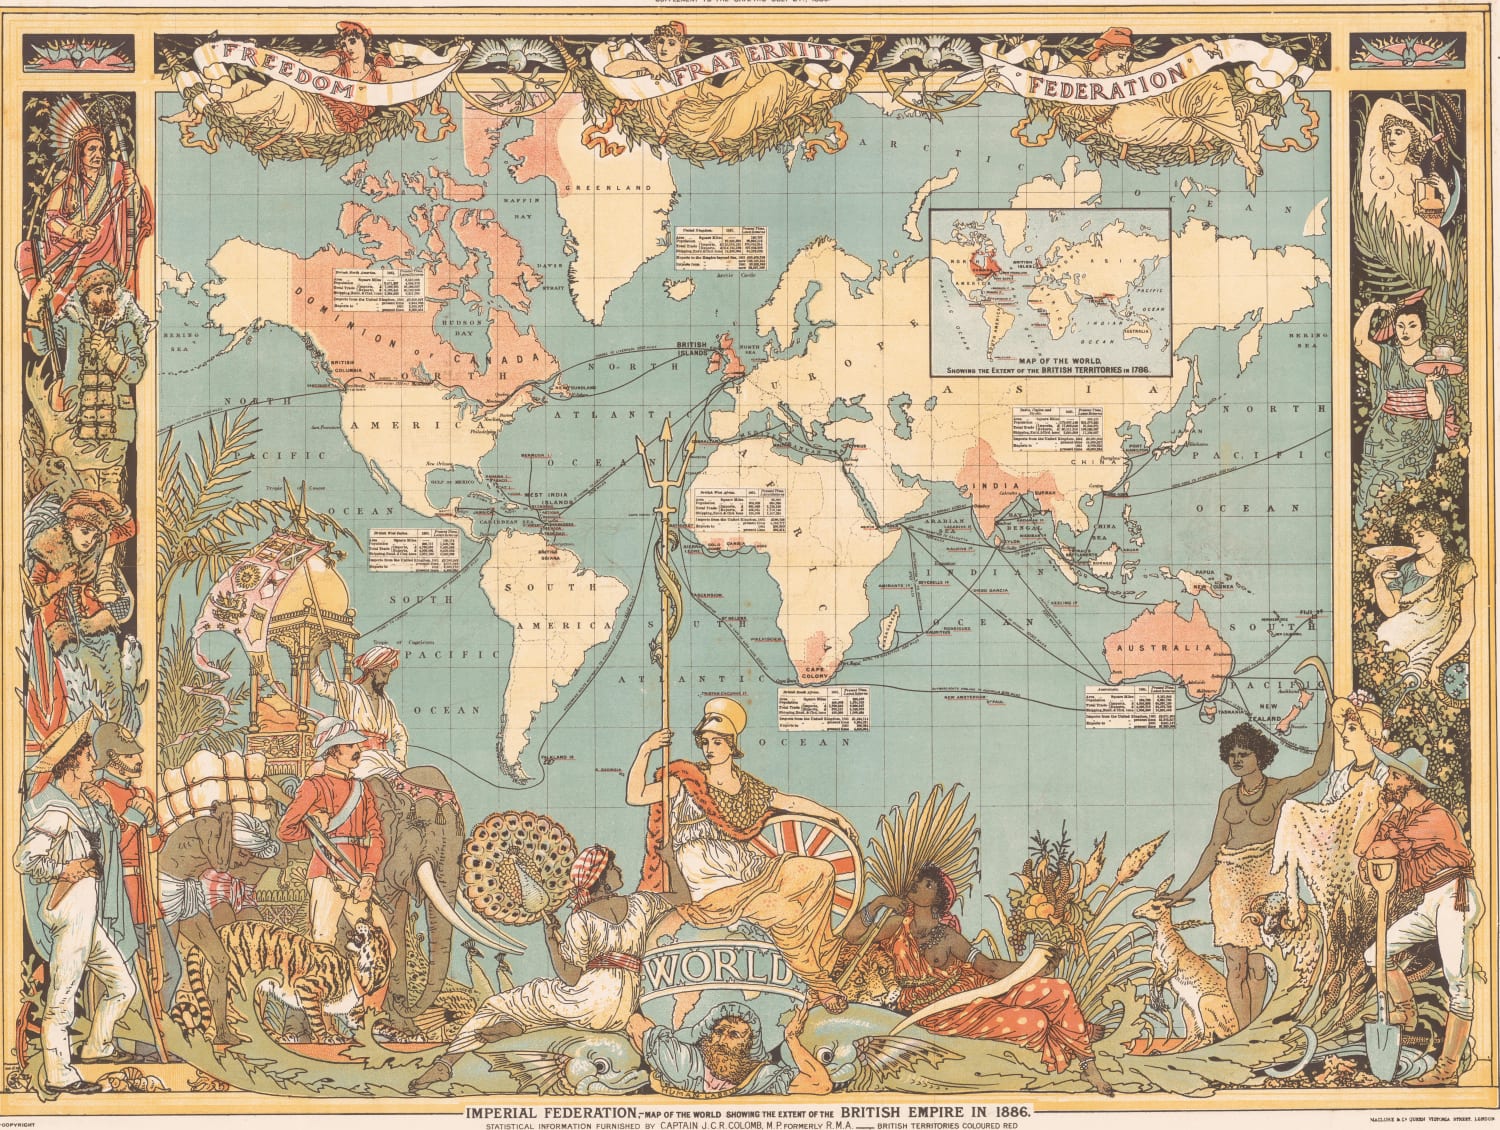 Walter Crane´s "Imperial Federation". Map of the world showing the extent of the British Empire in 1886